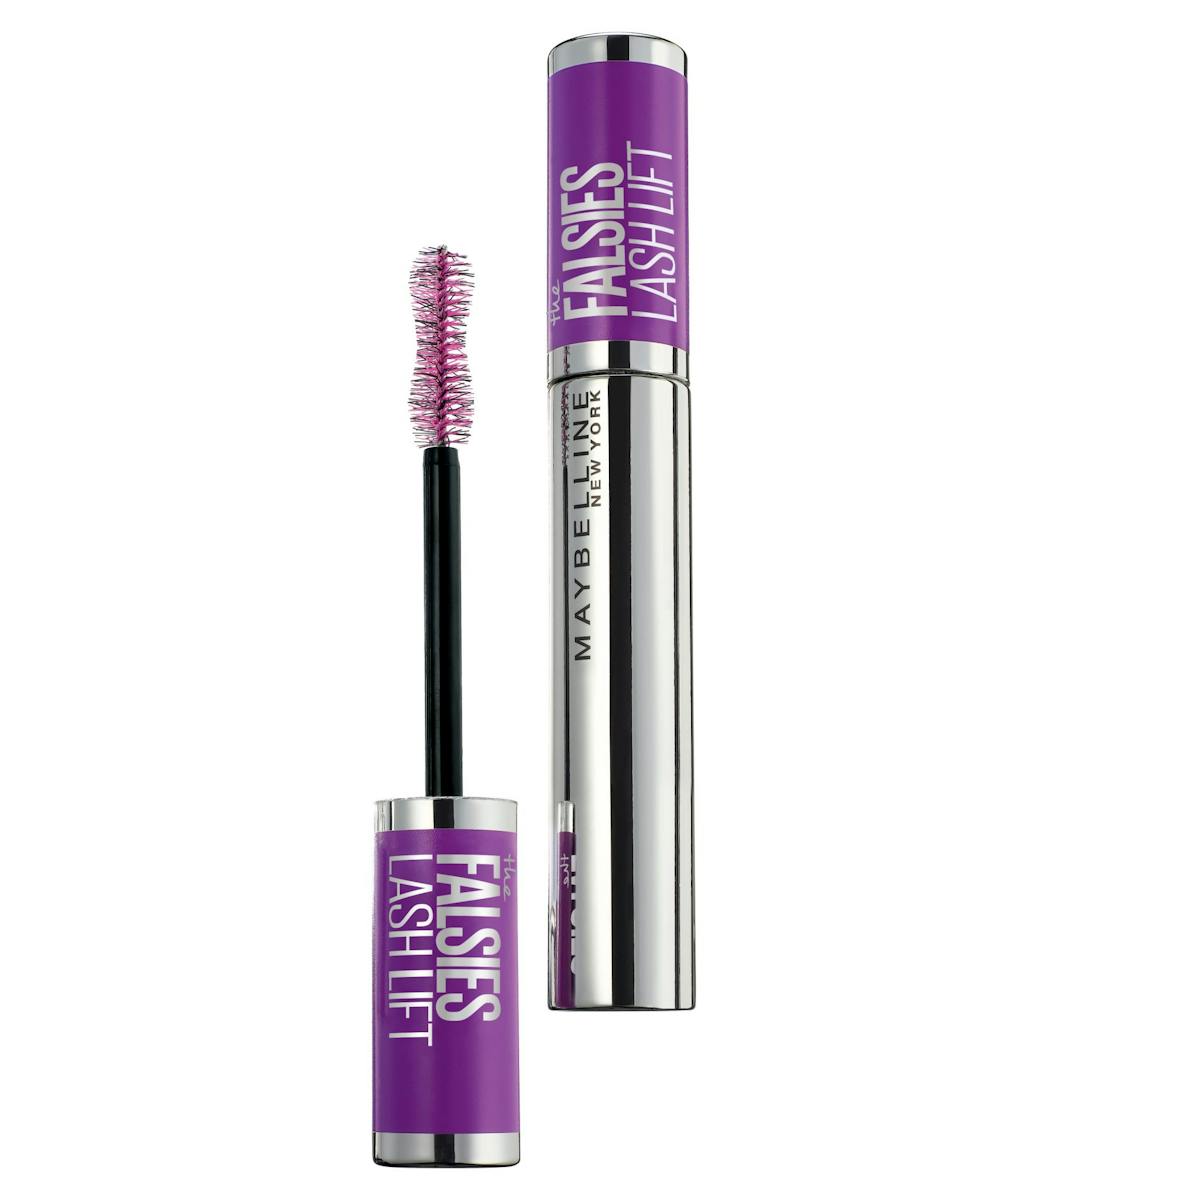 Maybelline The Falsies Lash Lift Mascara Review 0340